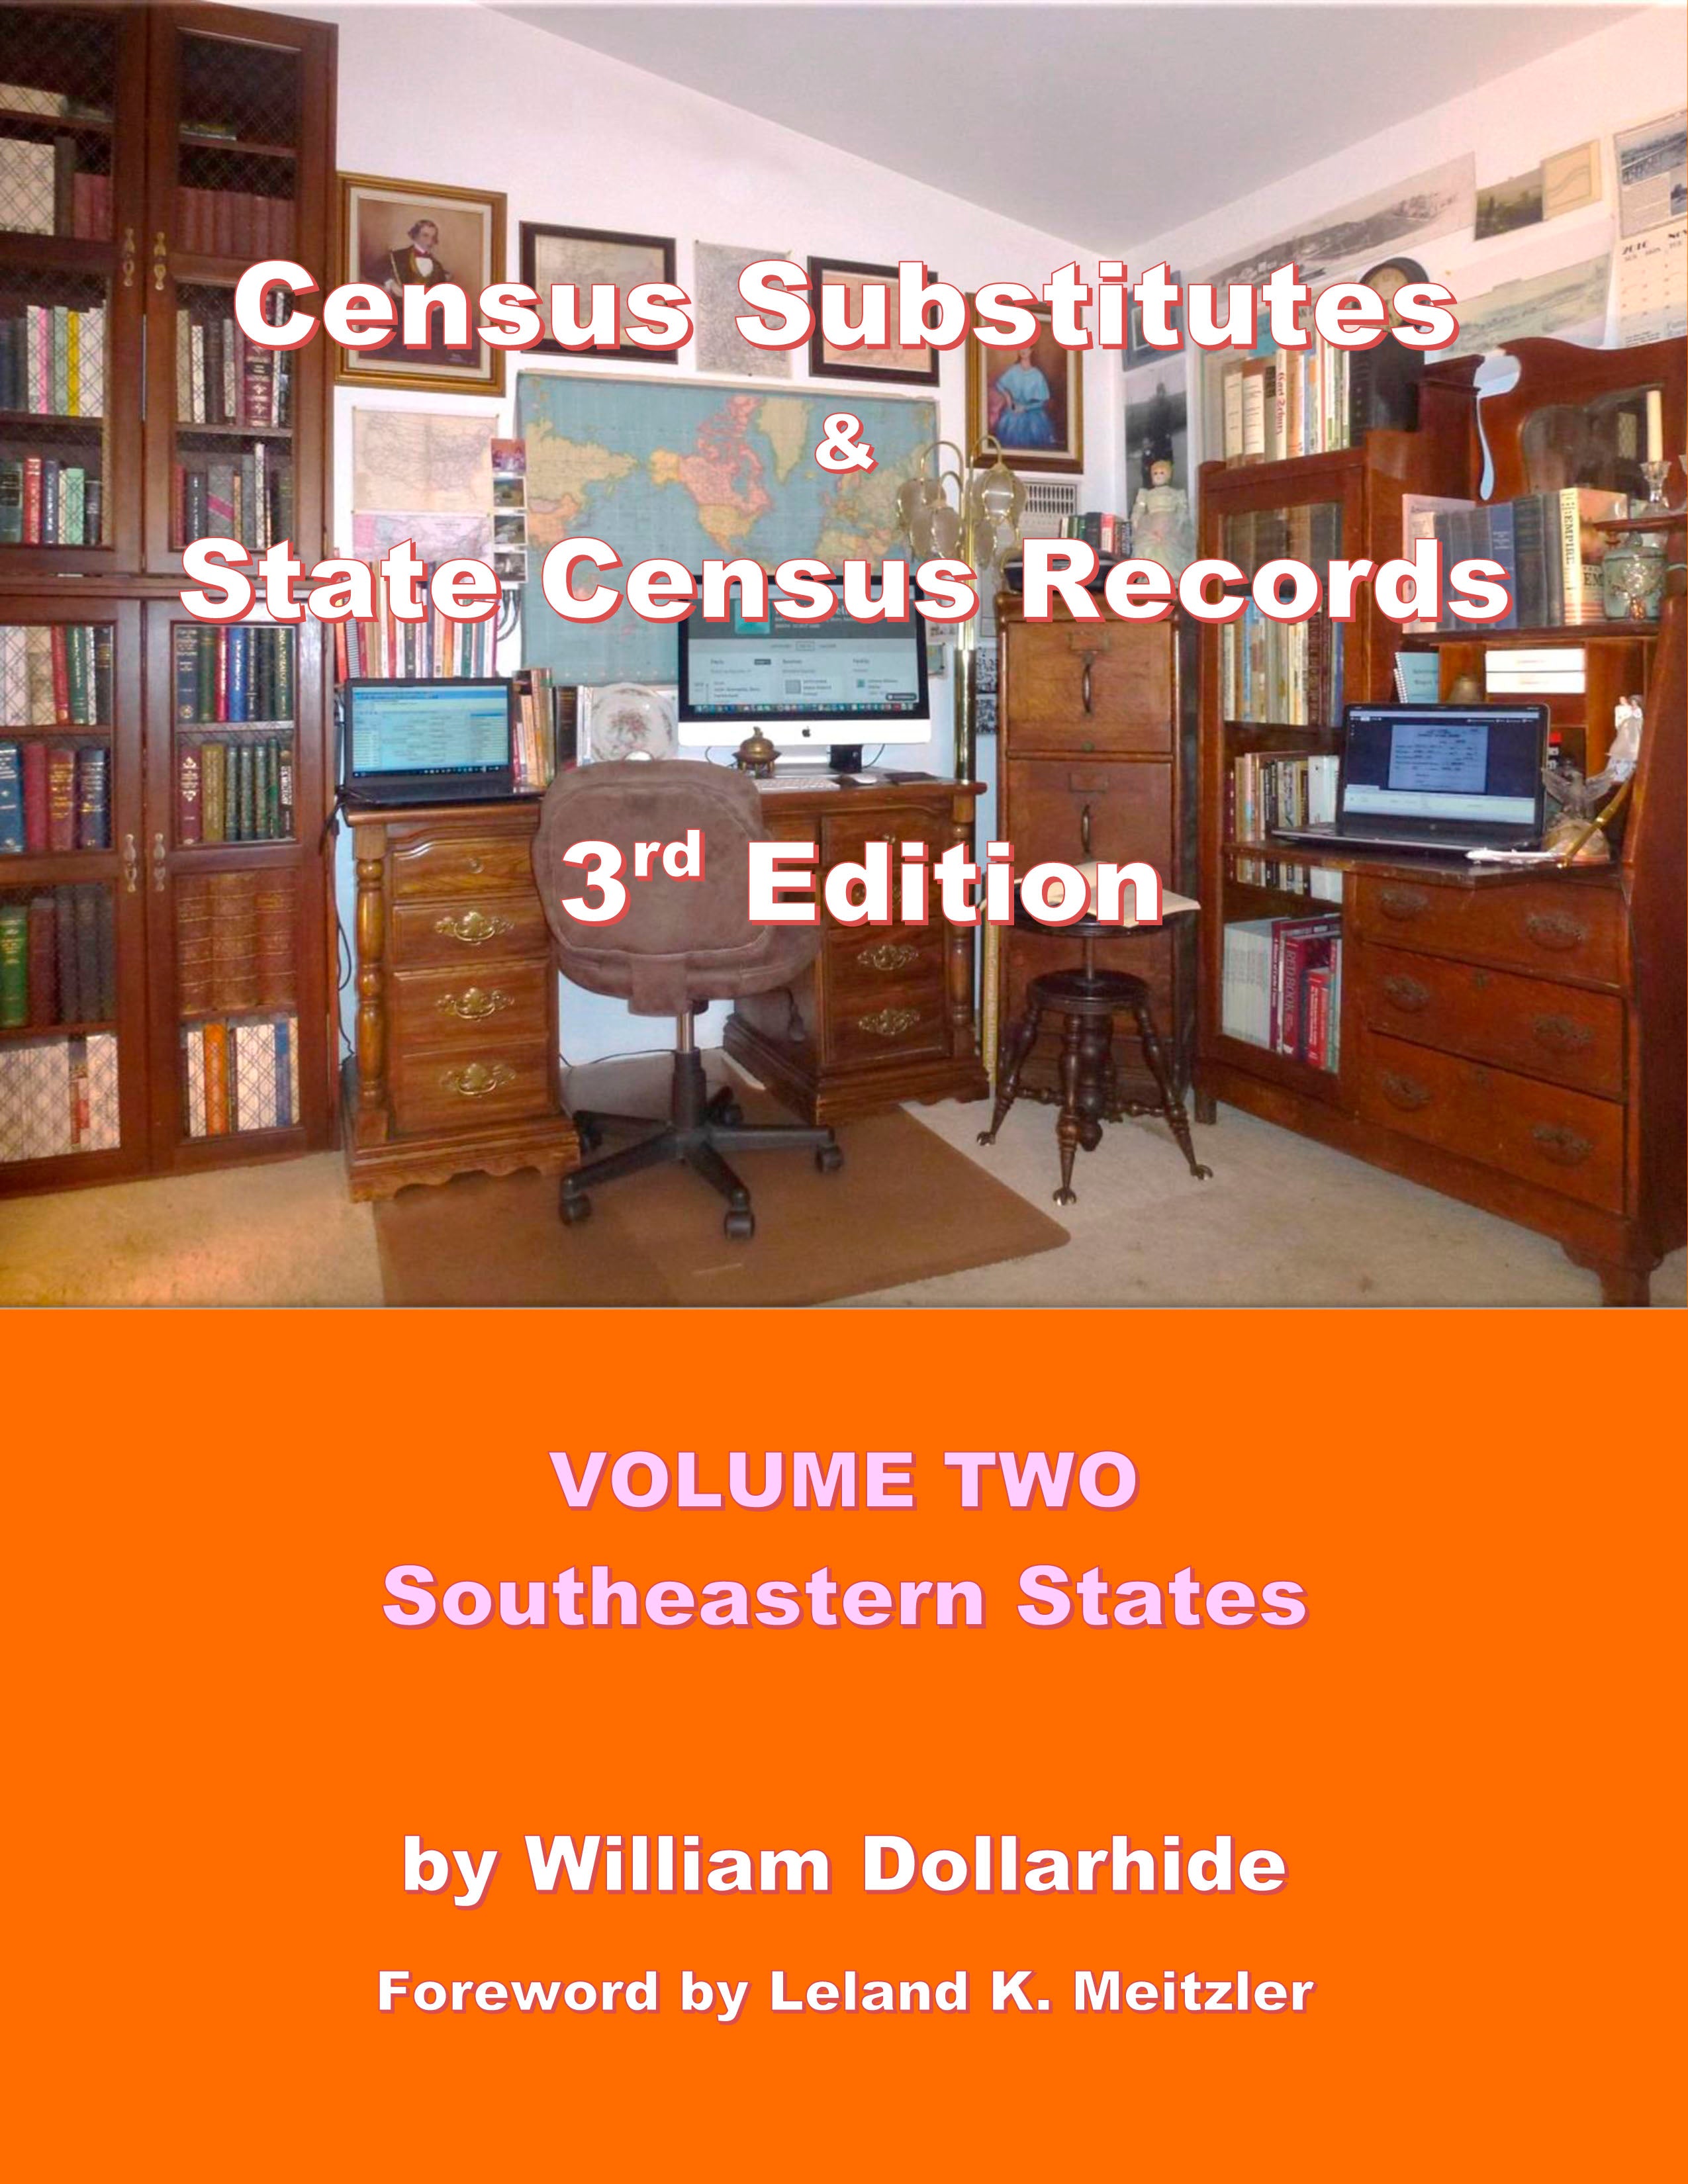 Census Substitutes & State Census Records, Third Edition, Volume 2 - Southeastern States - SOFTBOUND